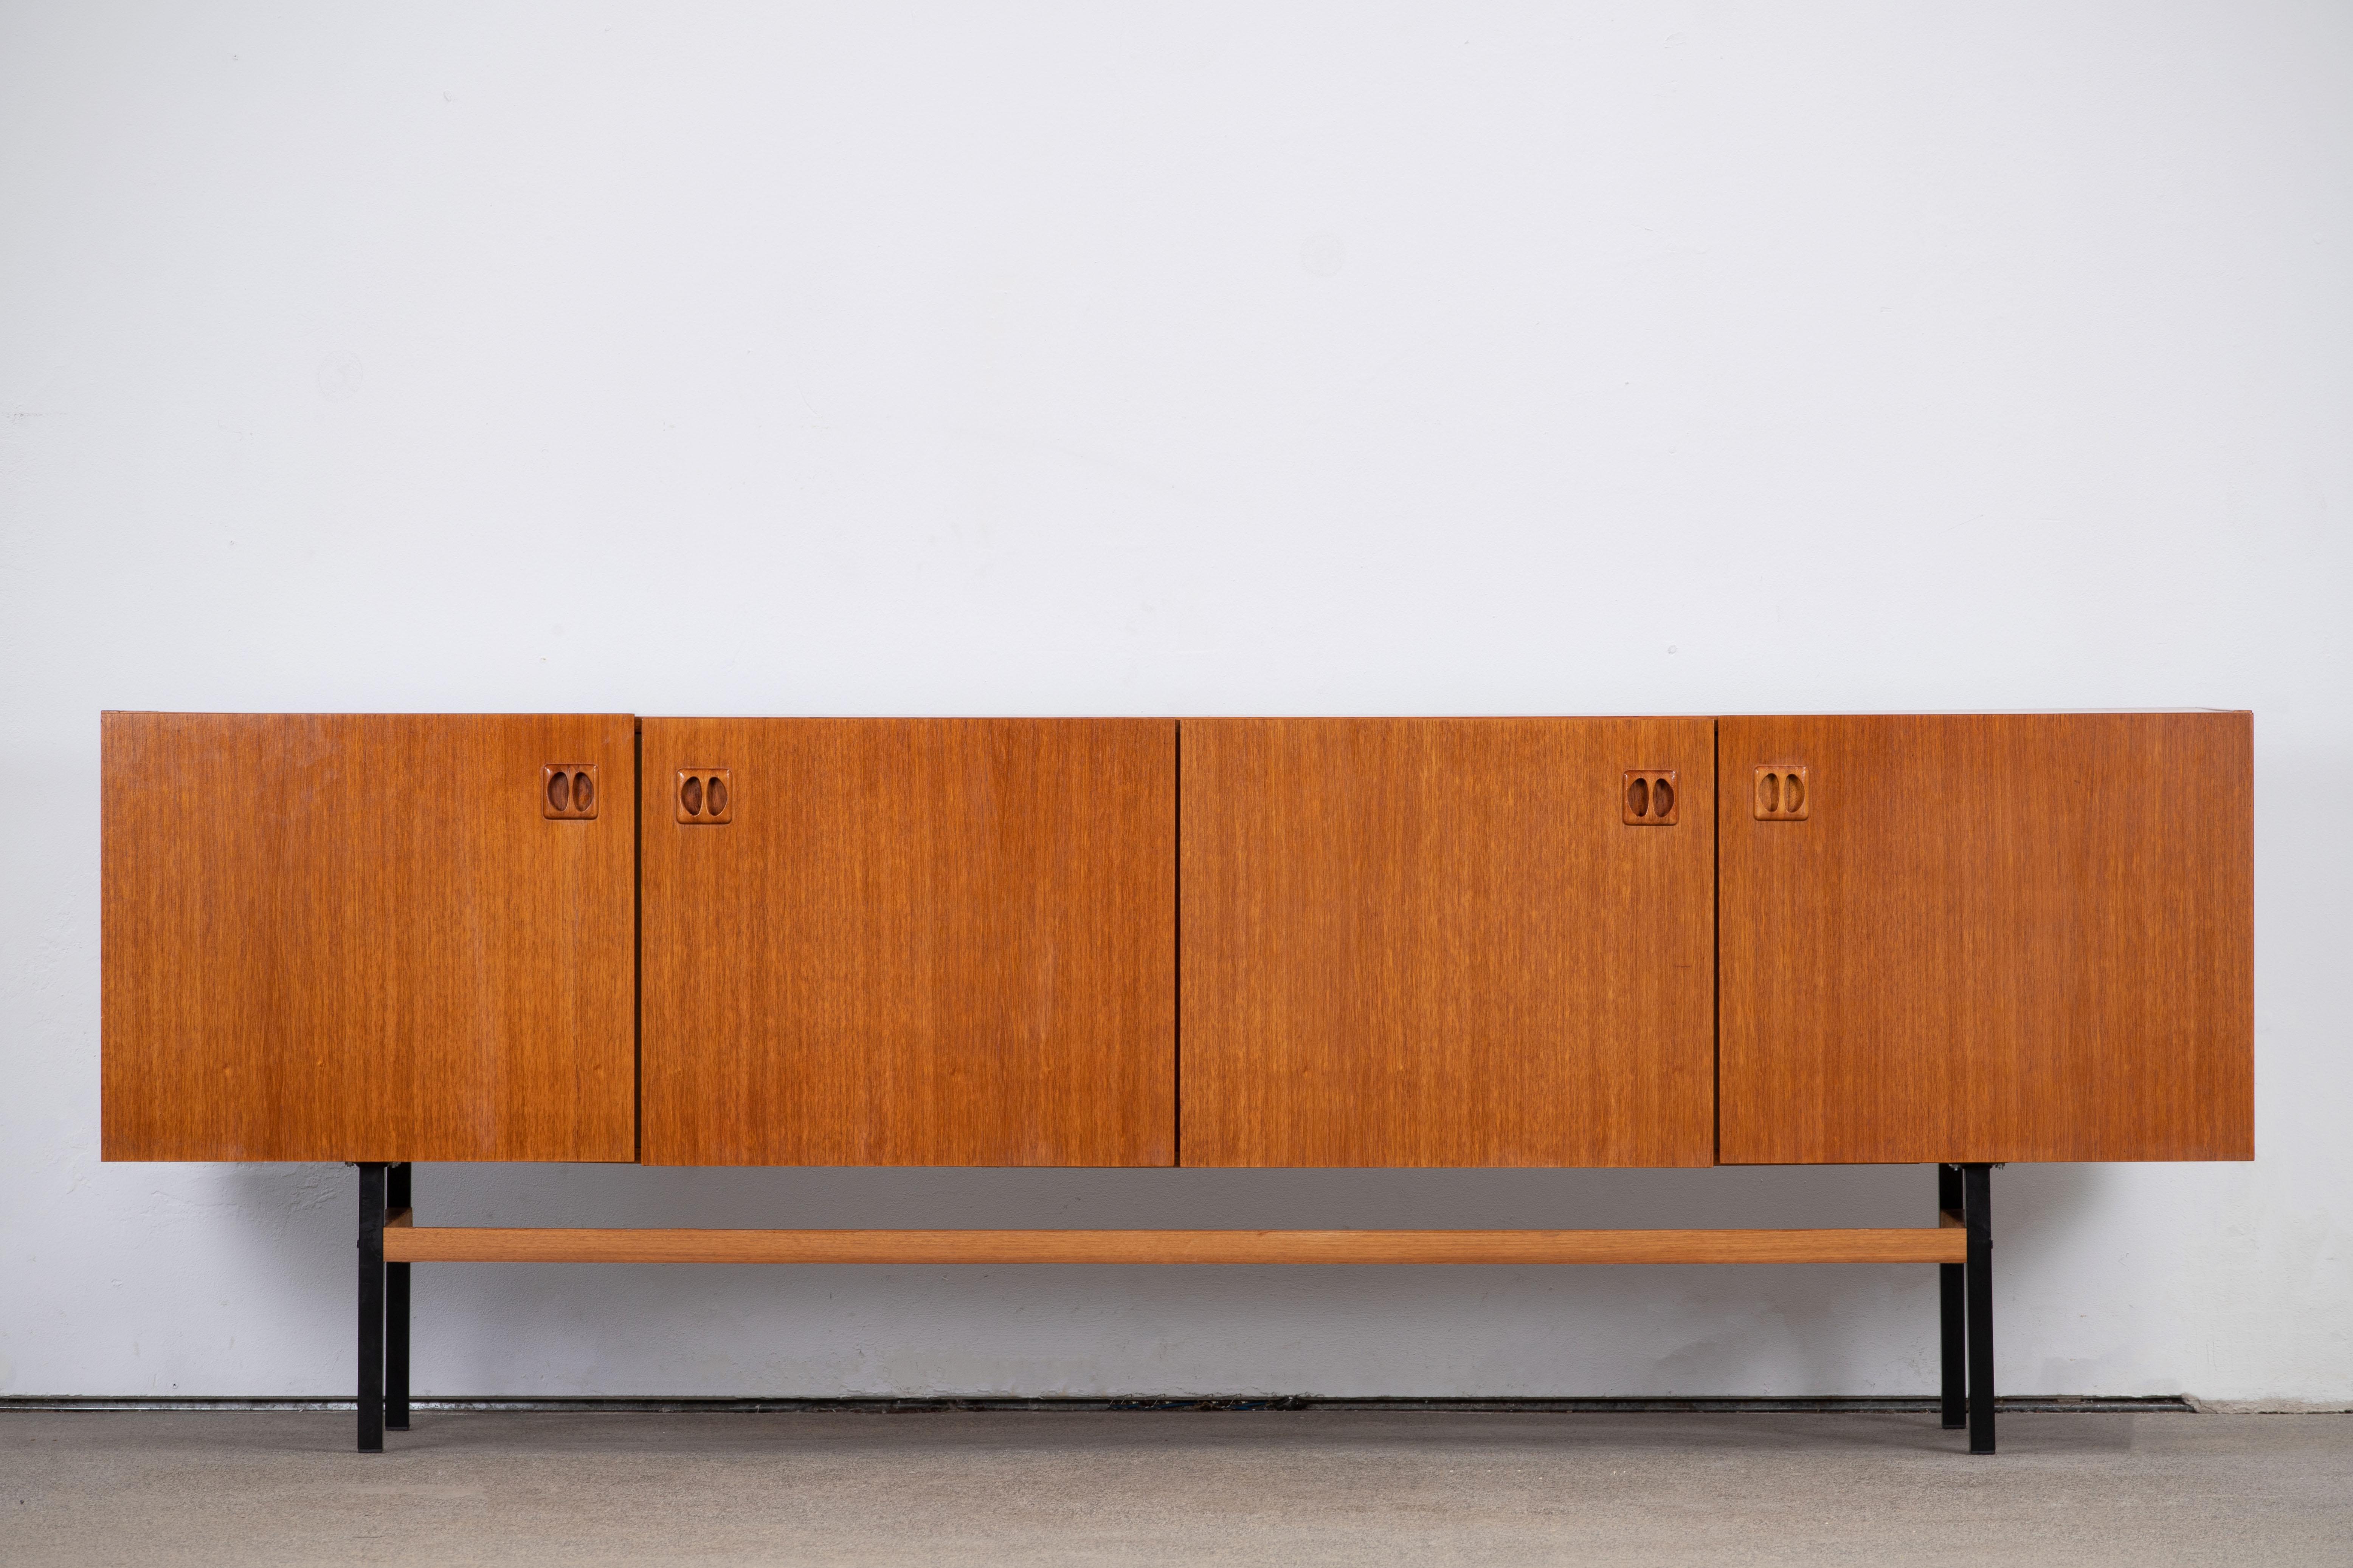 Midcentury teak sideboard from the 1960s. It is a shining example of the form and function synonymous with furniture of this era. Well-built, great design and lightness. Three drawers storage space. The minimal design and the warm tone combined with